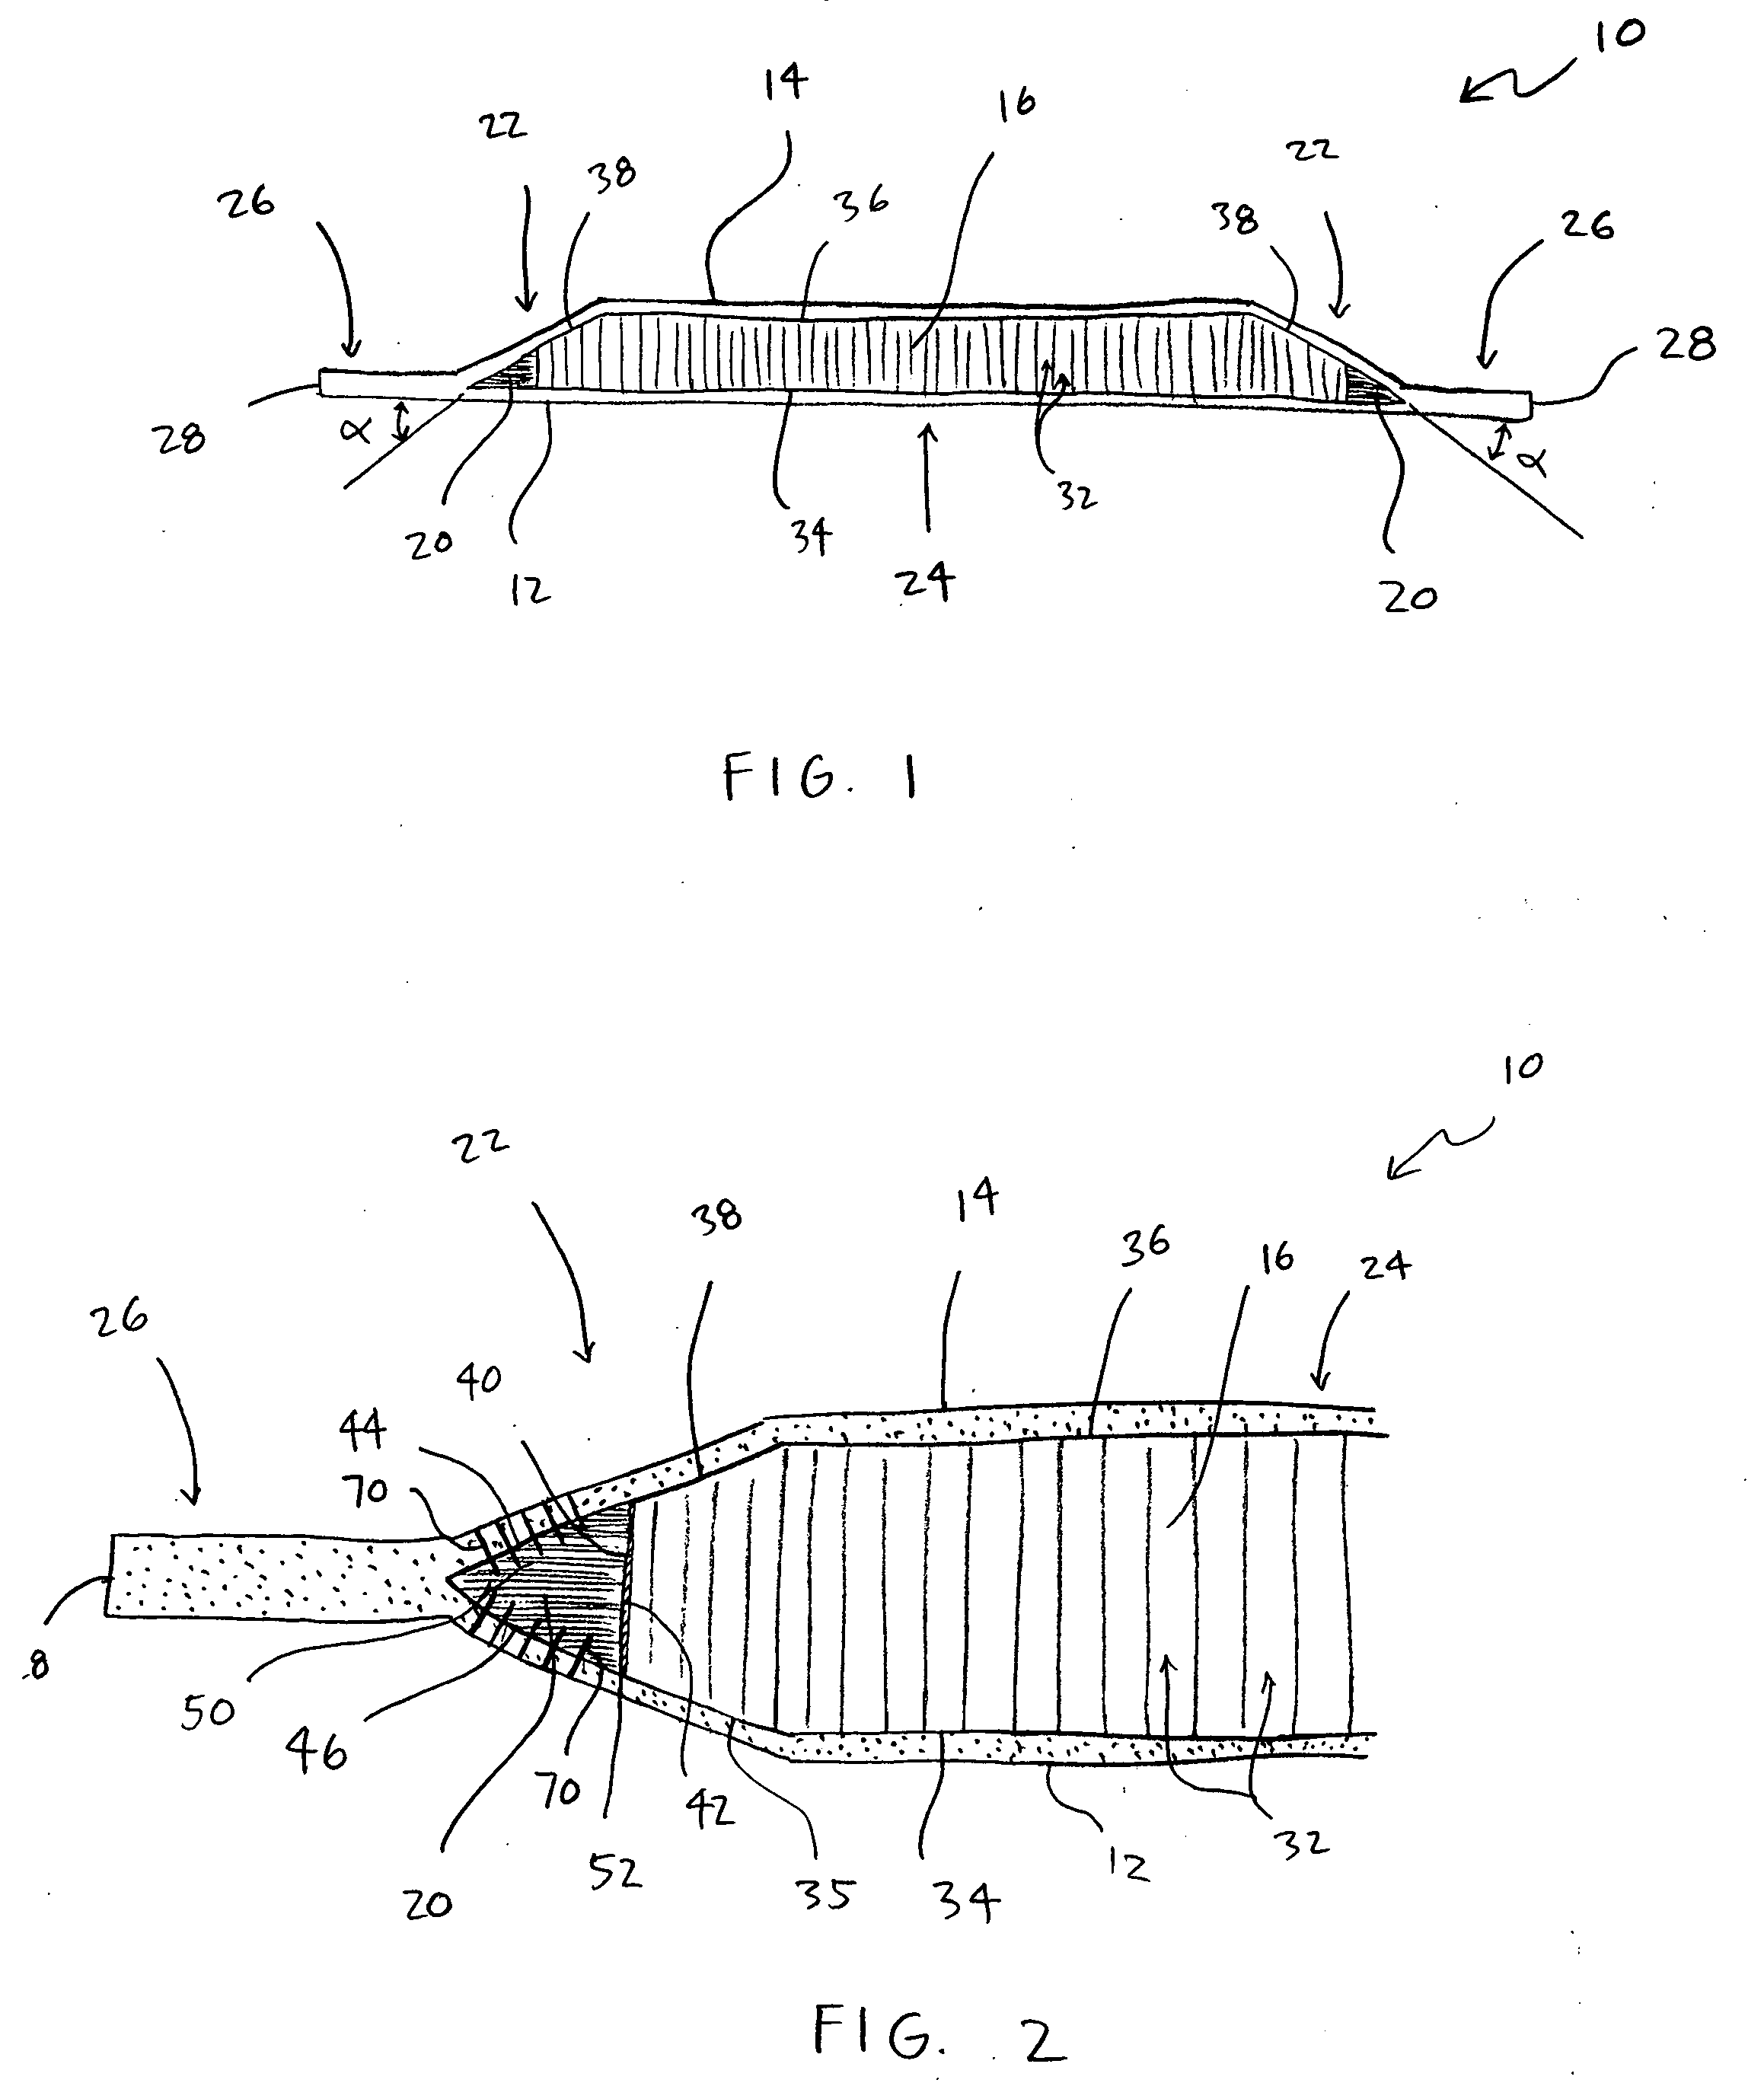 Reinforced rampdown for composite structural member and method for same